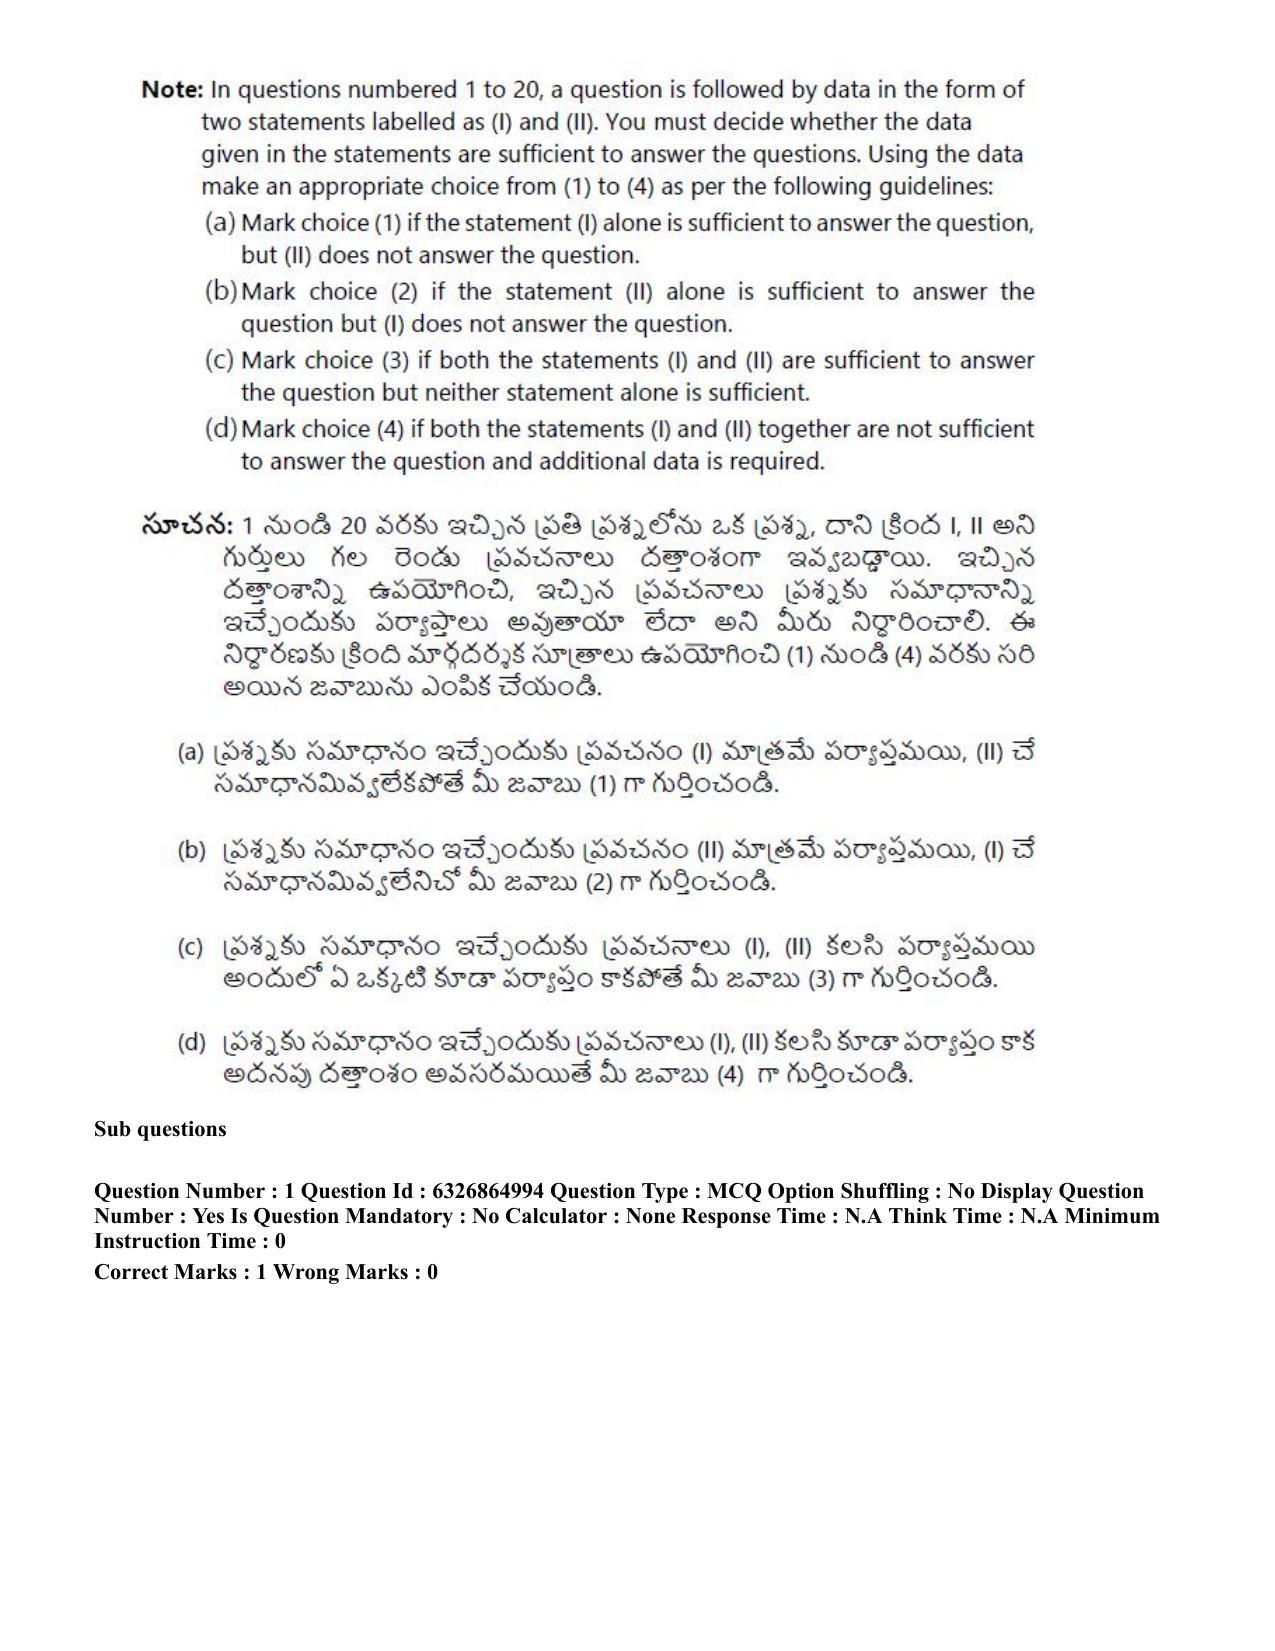 TS ICET 2022 Question Paper 2 - Jul 28, 2022	 - Page 3